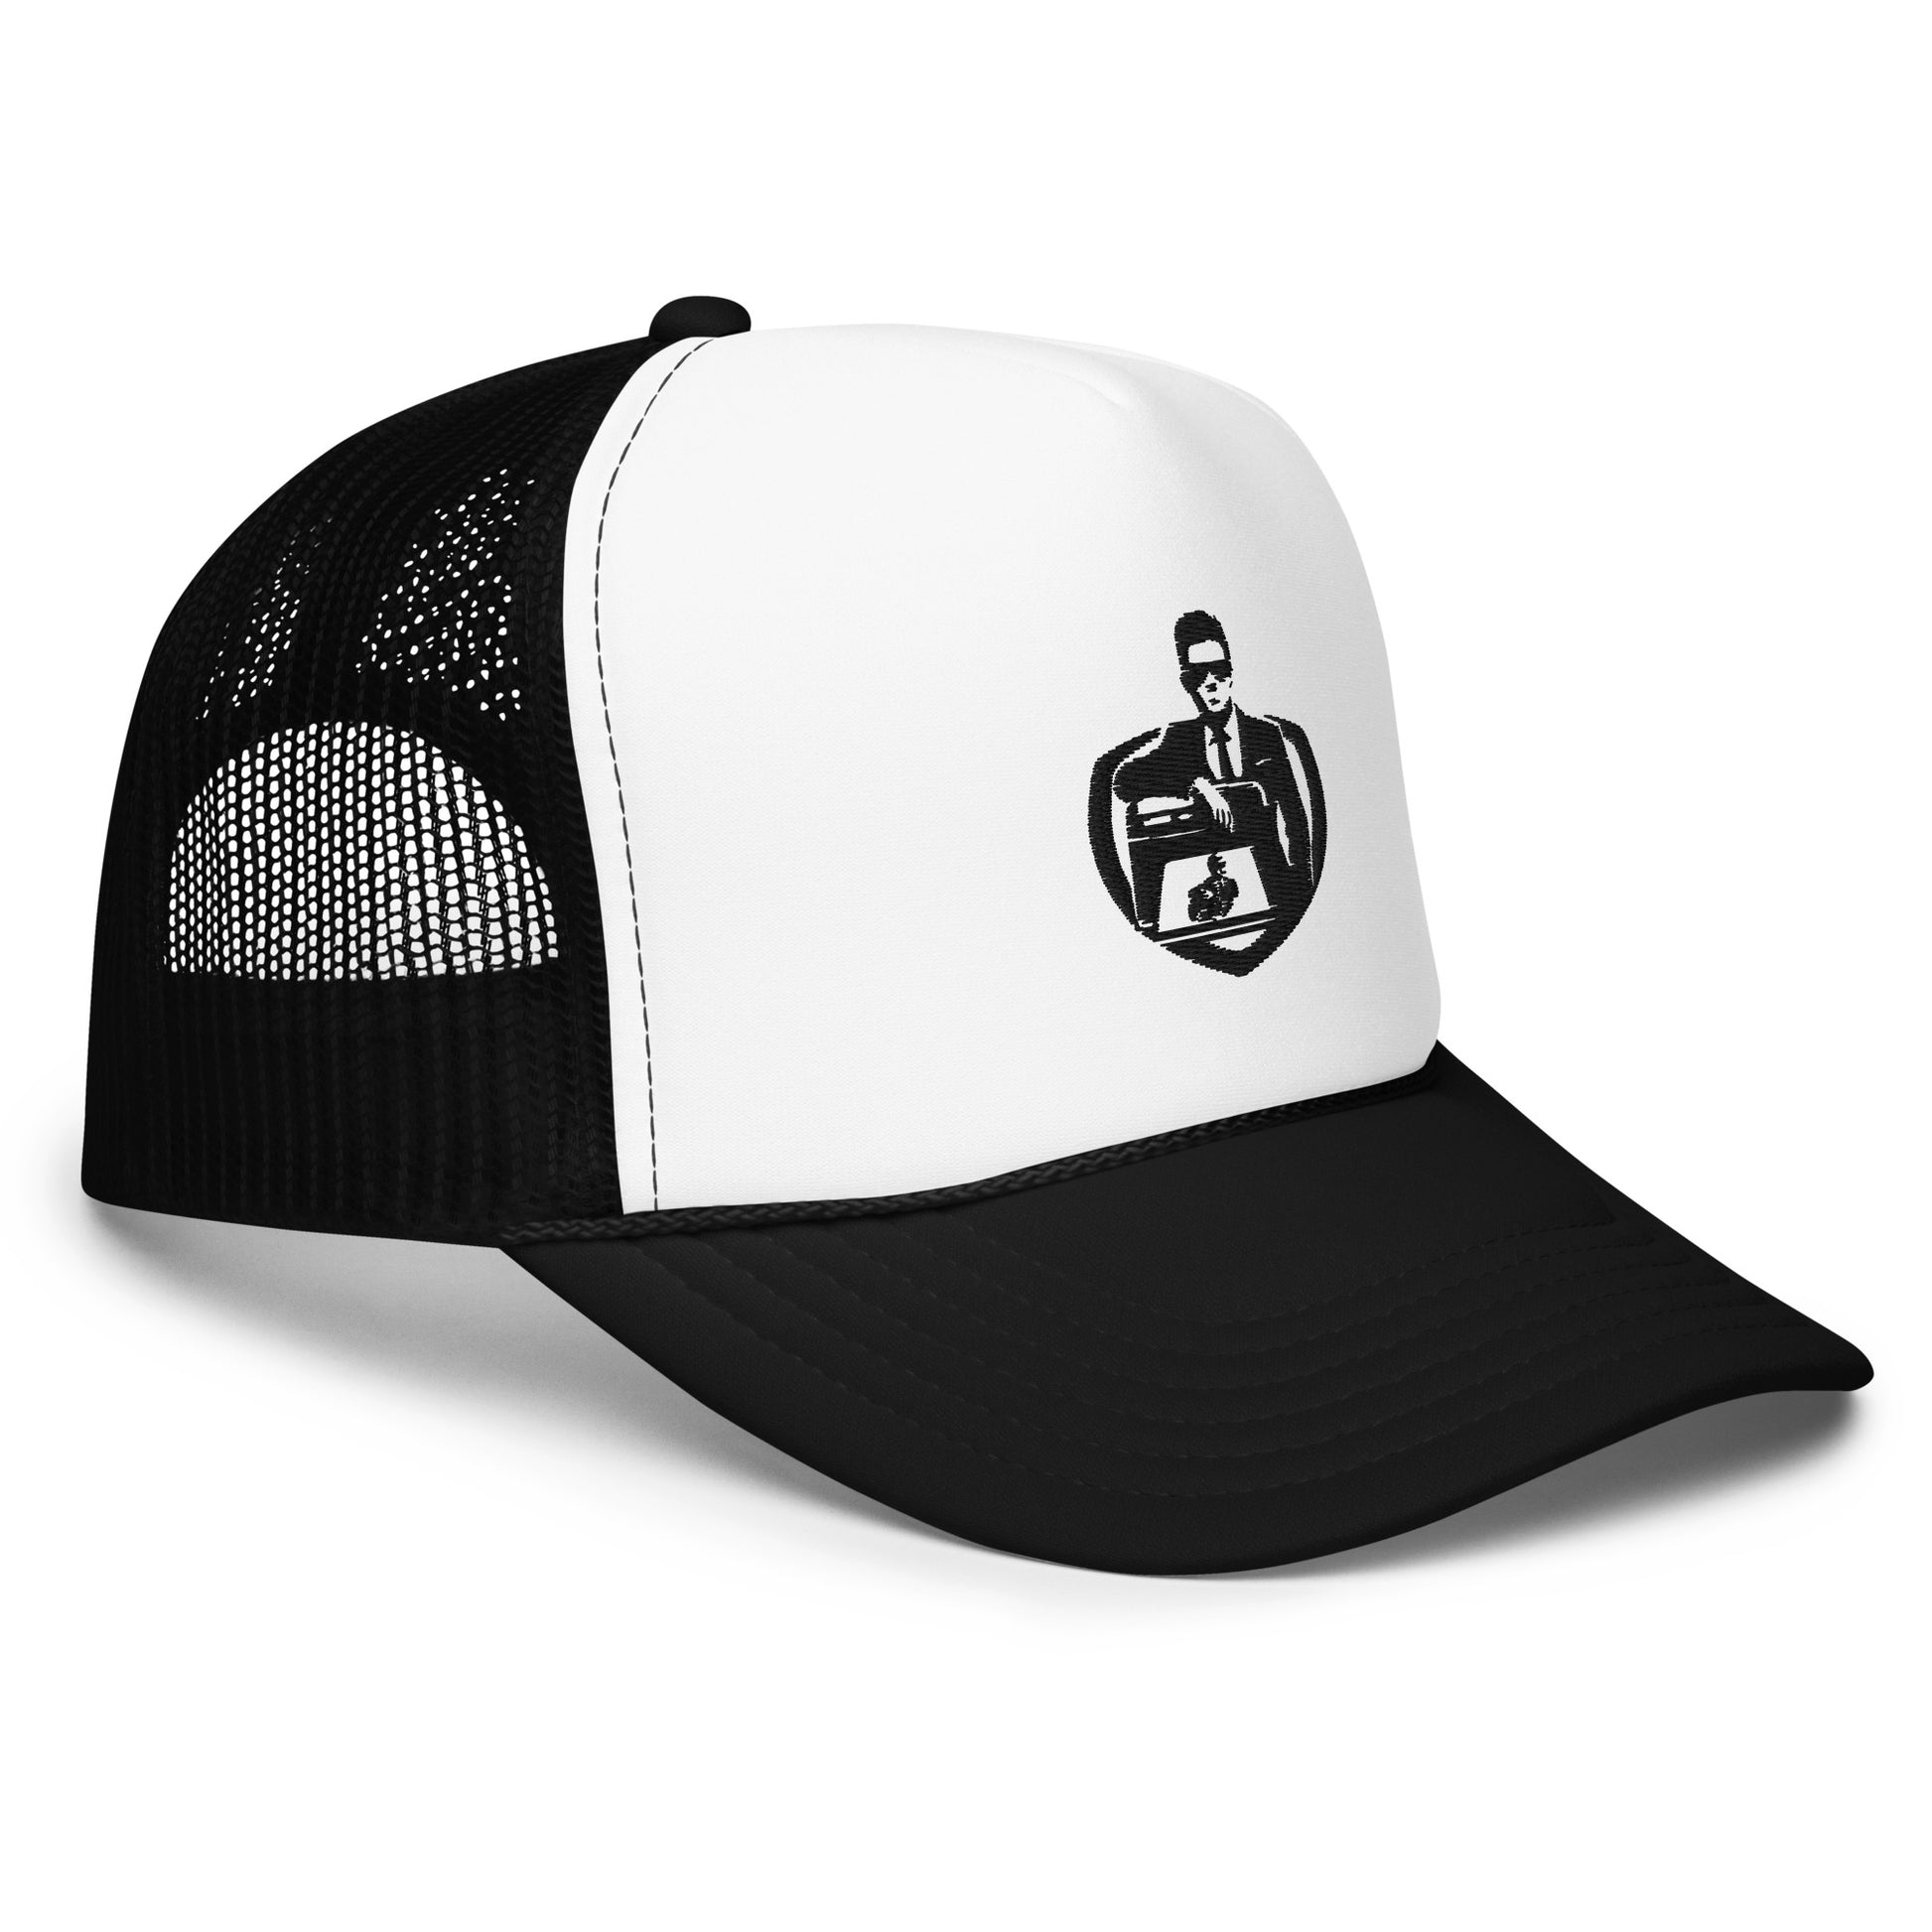 Black Logo - A Guy With A Printer Foam trucker hat - A Guy With A Printer